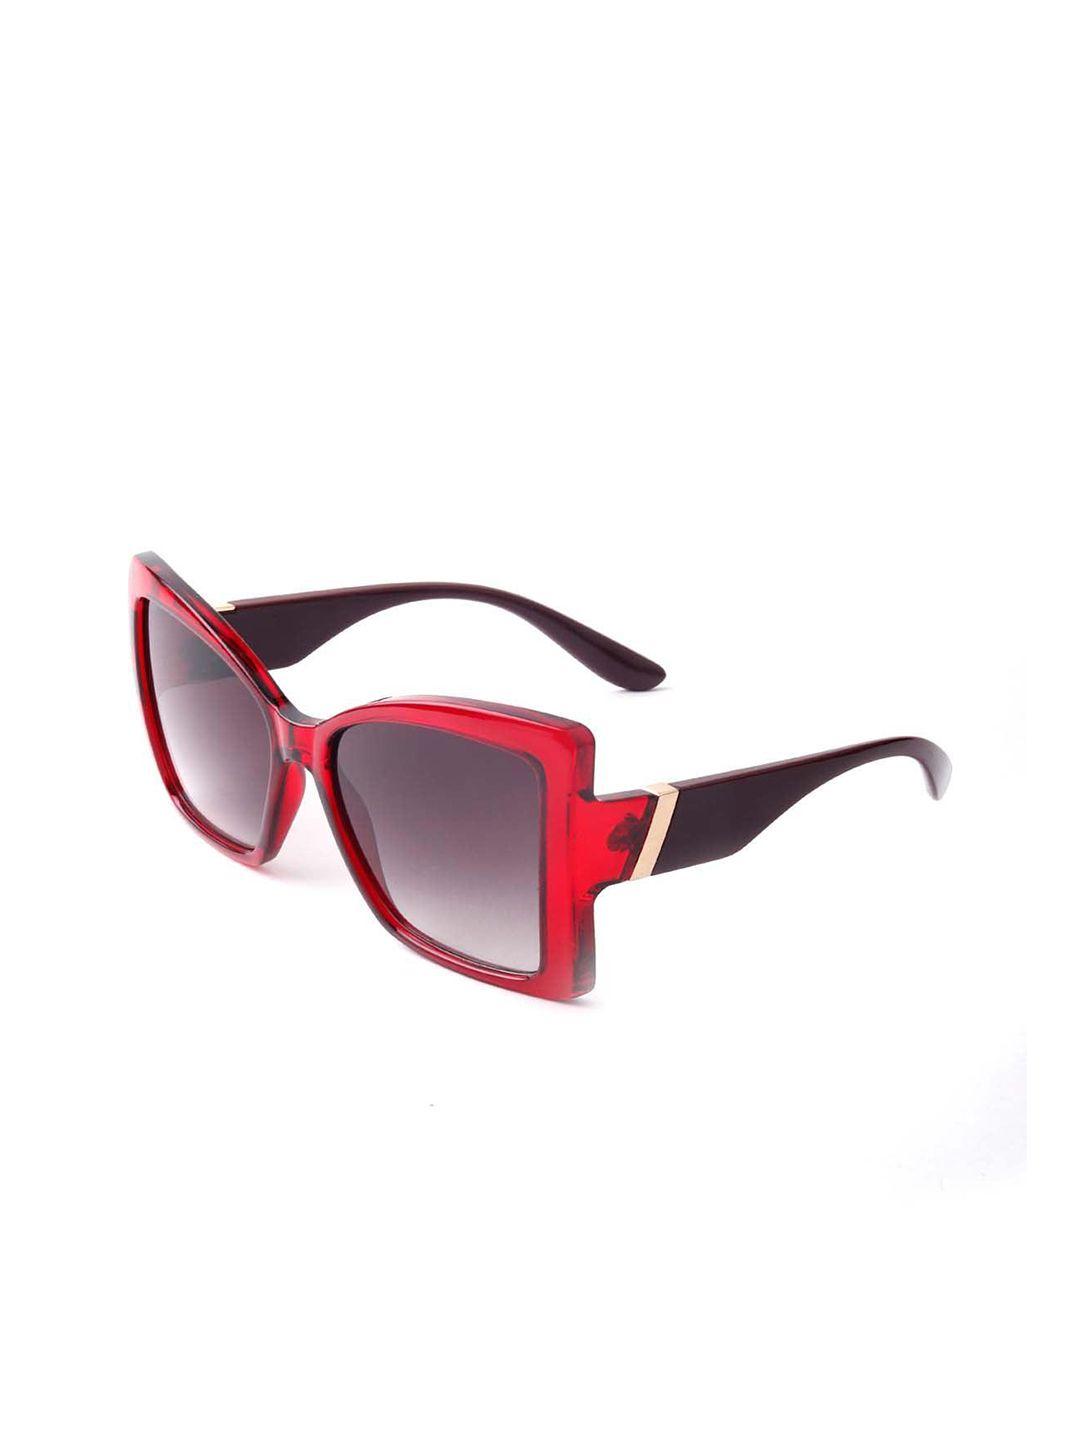 odette women square sunglasses with uv protected lens